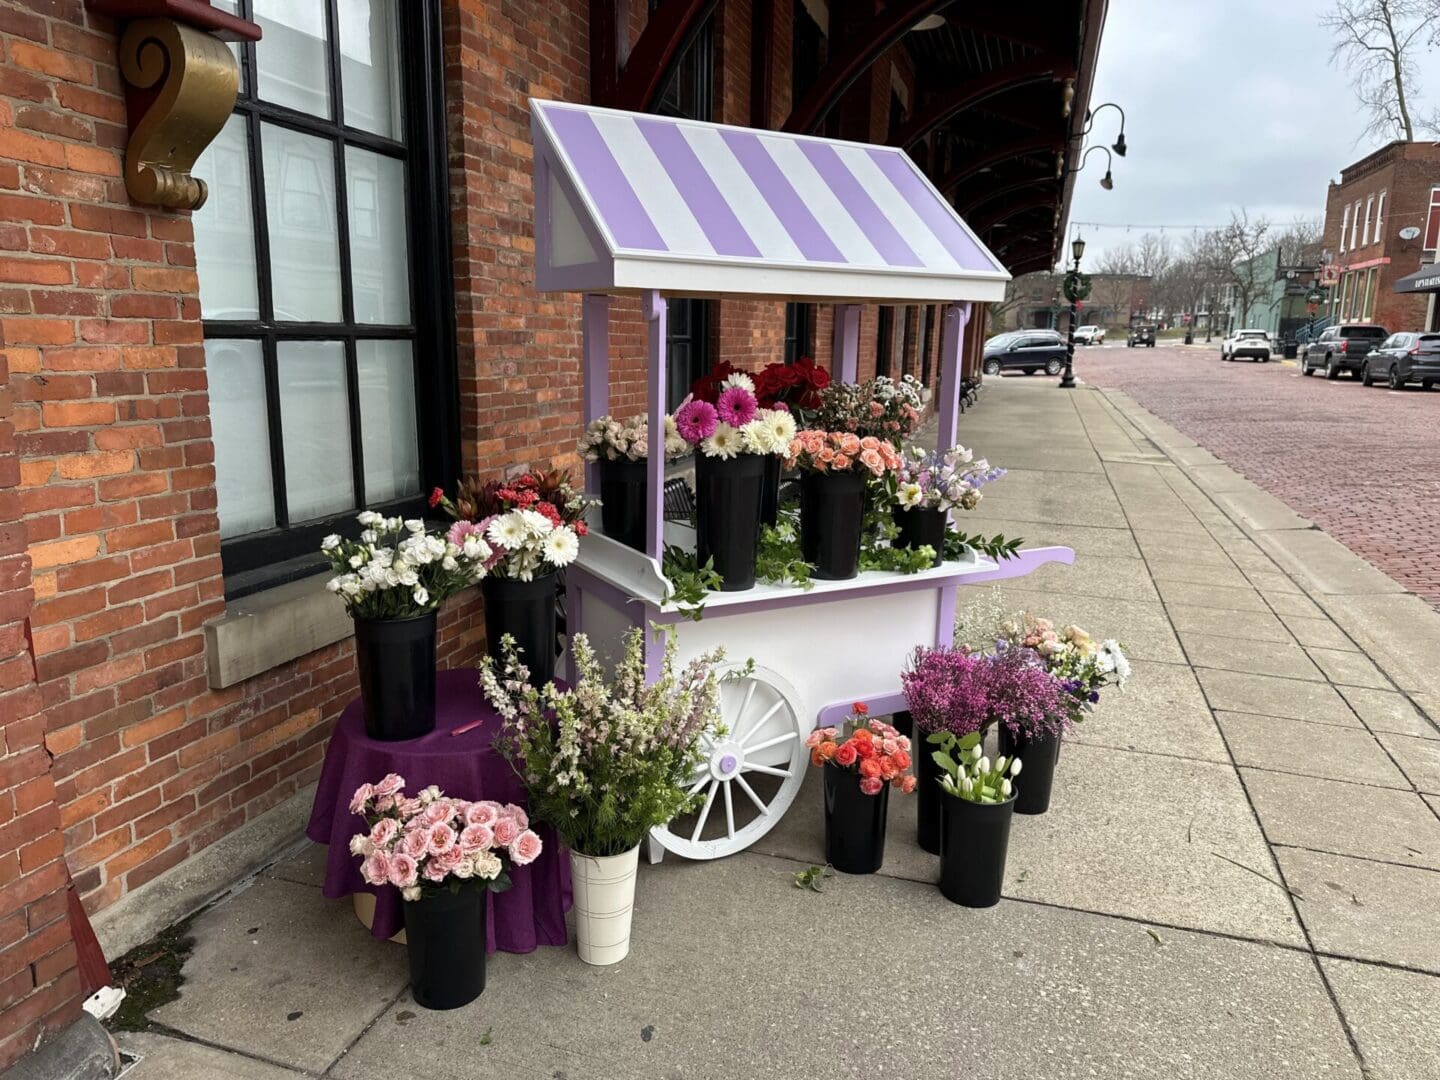 A flower cart with flowers on the side of the street.